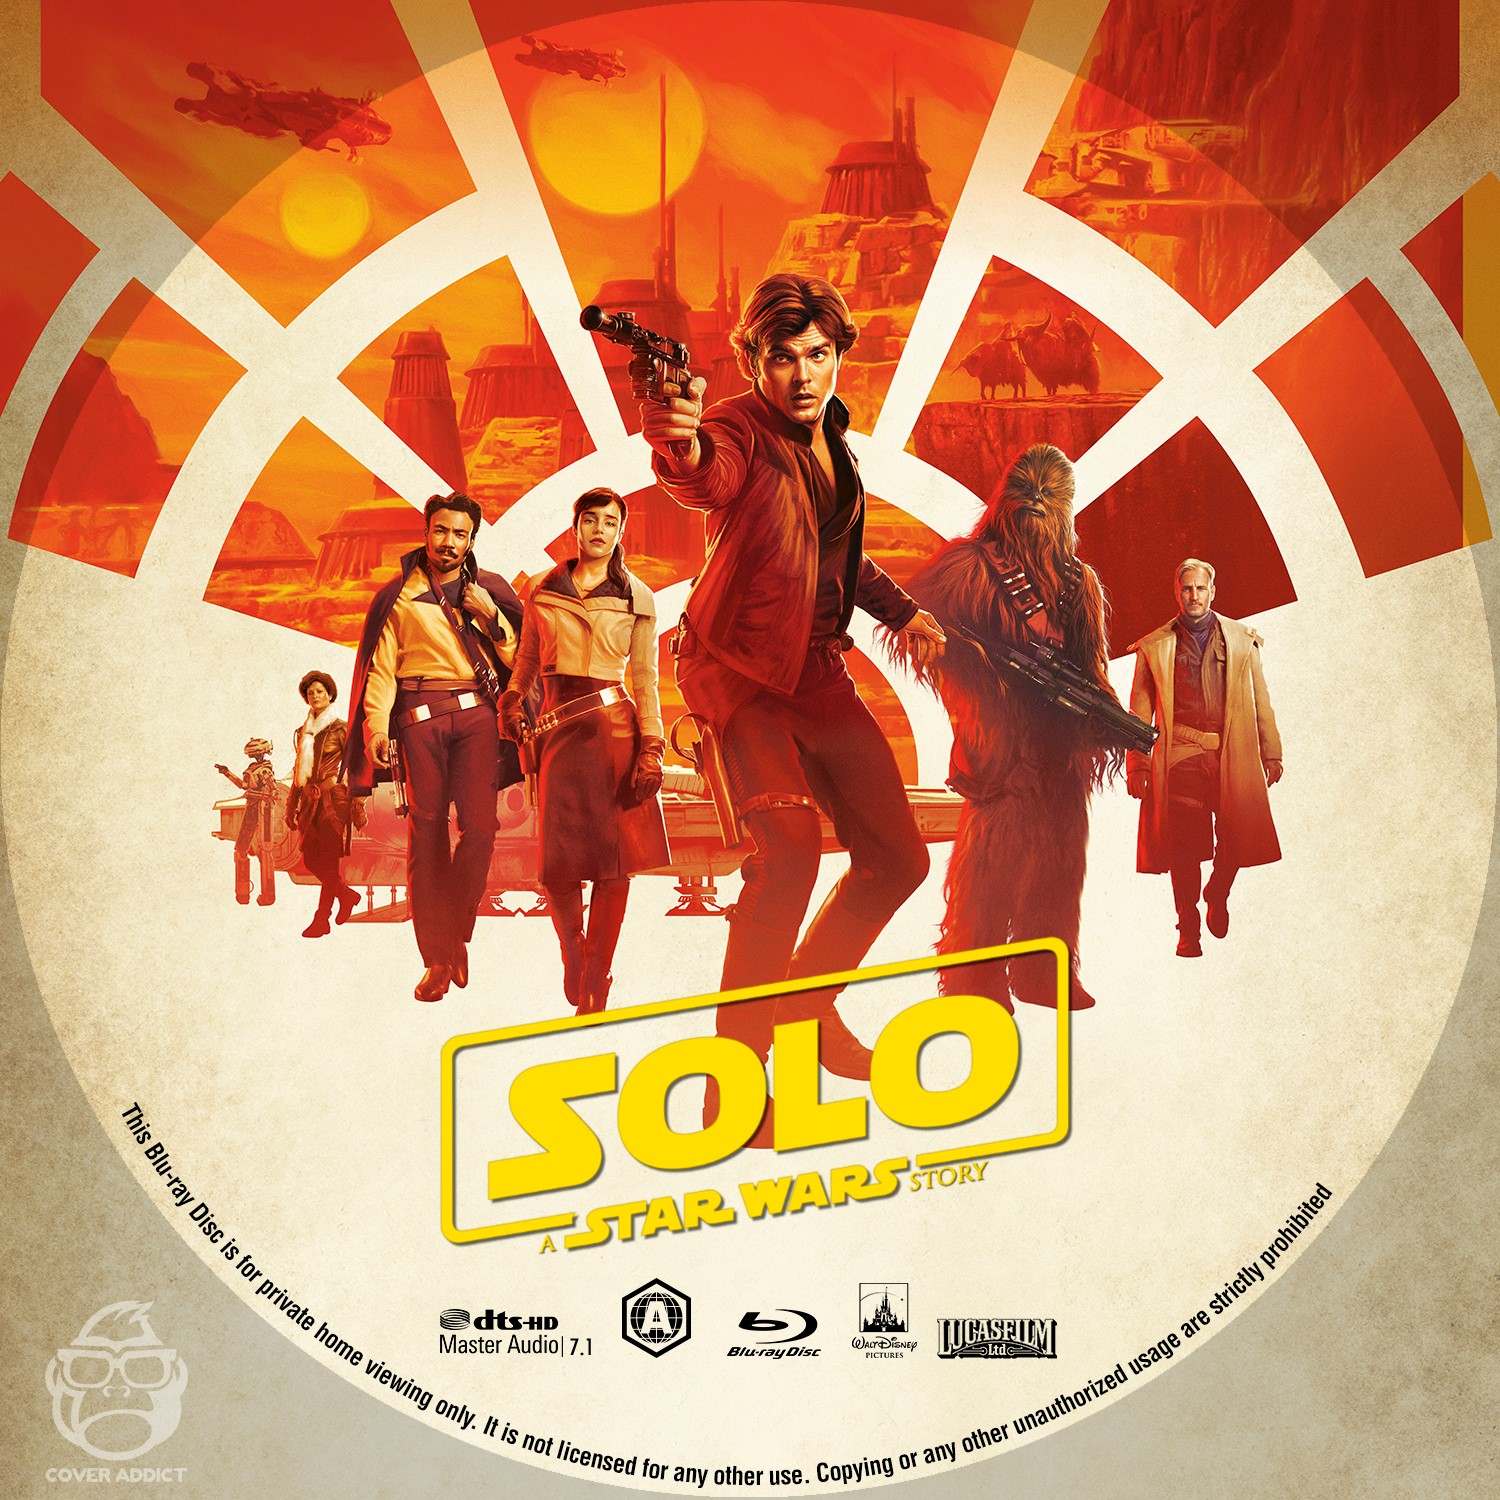 Solo: A Star Wars Story Bluray Label  Cover Addict - DVD 